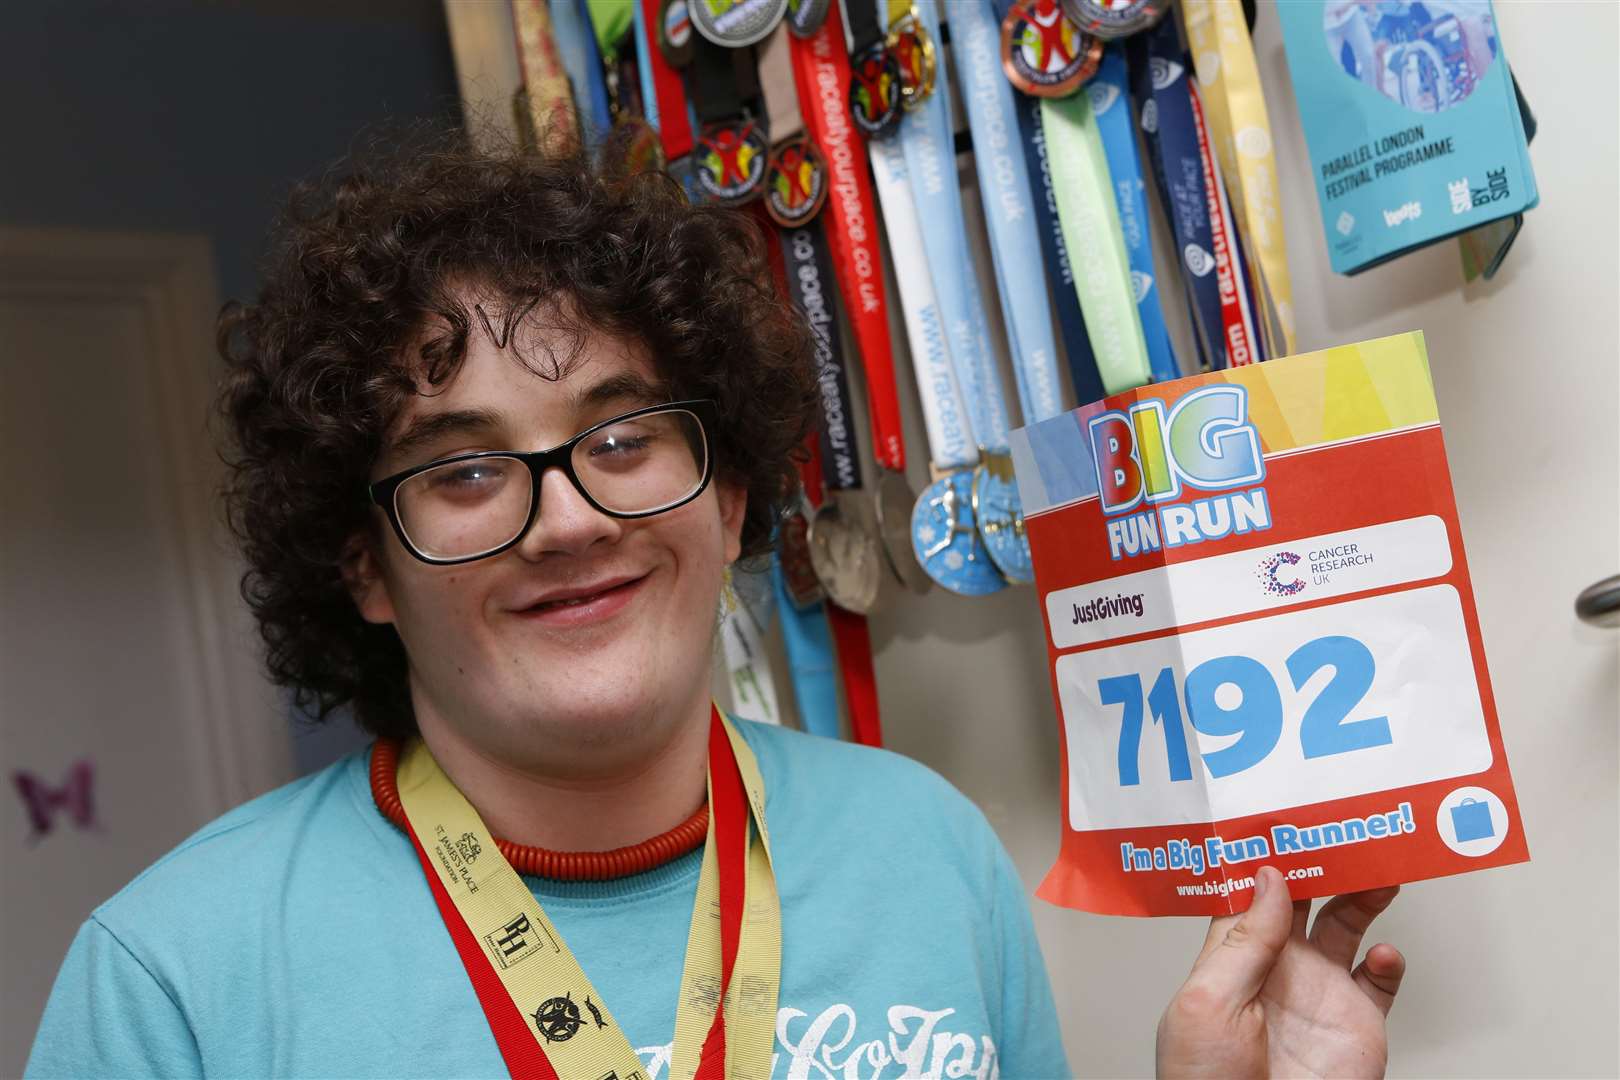 Owen has been taking part in 5k runs and other sports after getting a new wheelchair